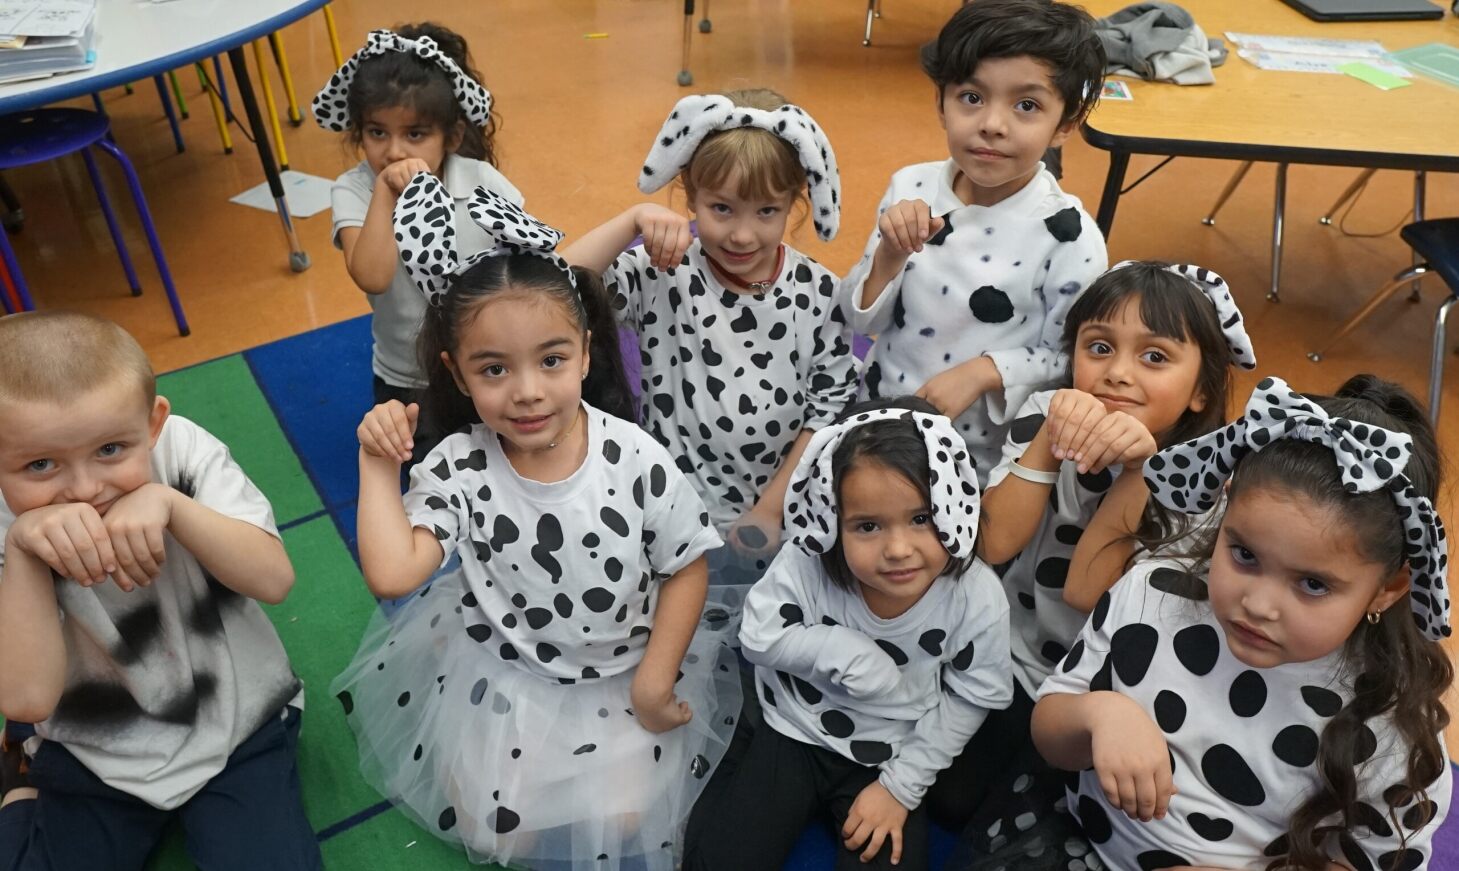 Students pose as the 101 Dalmatians on the 101st day of school